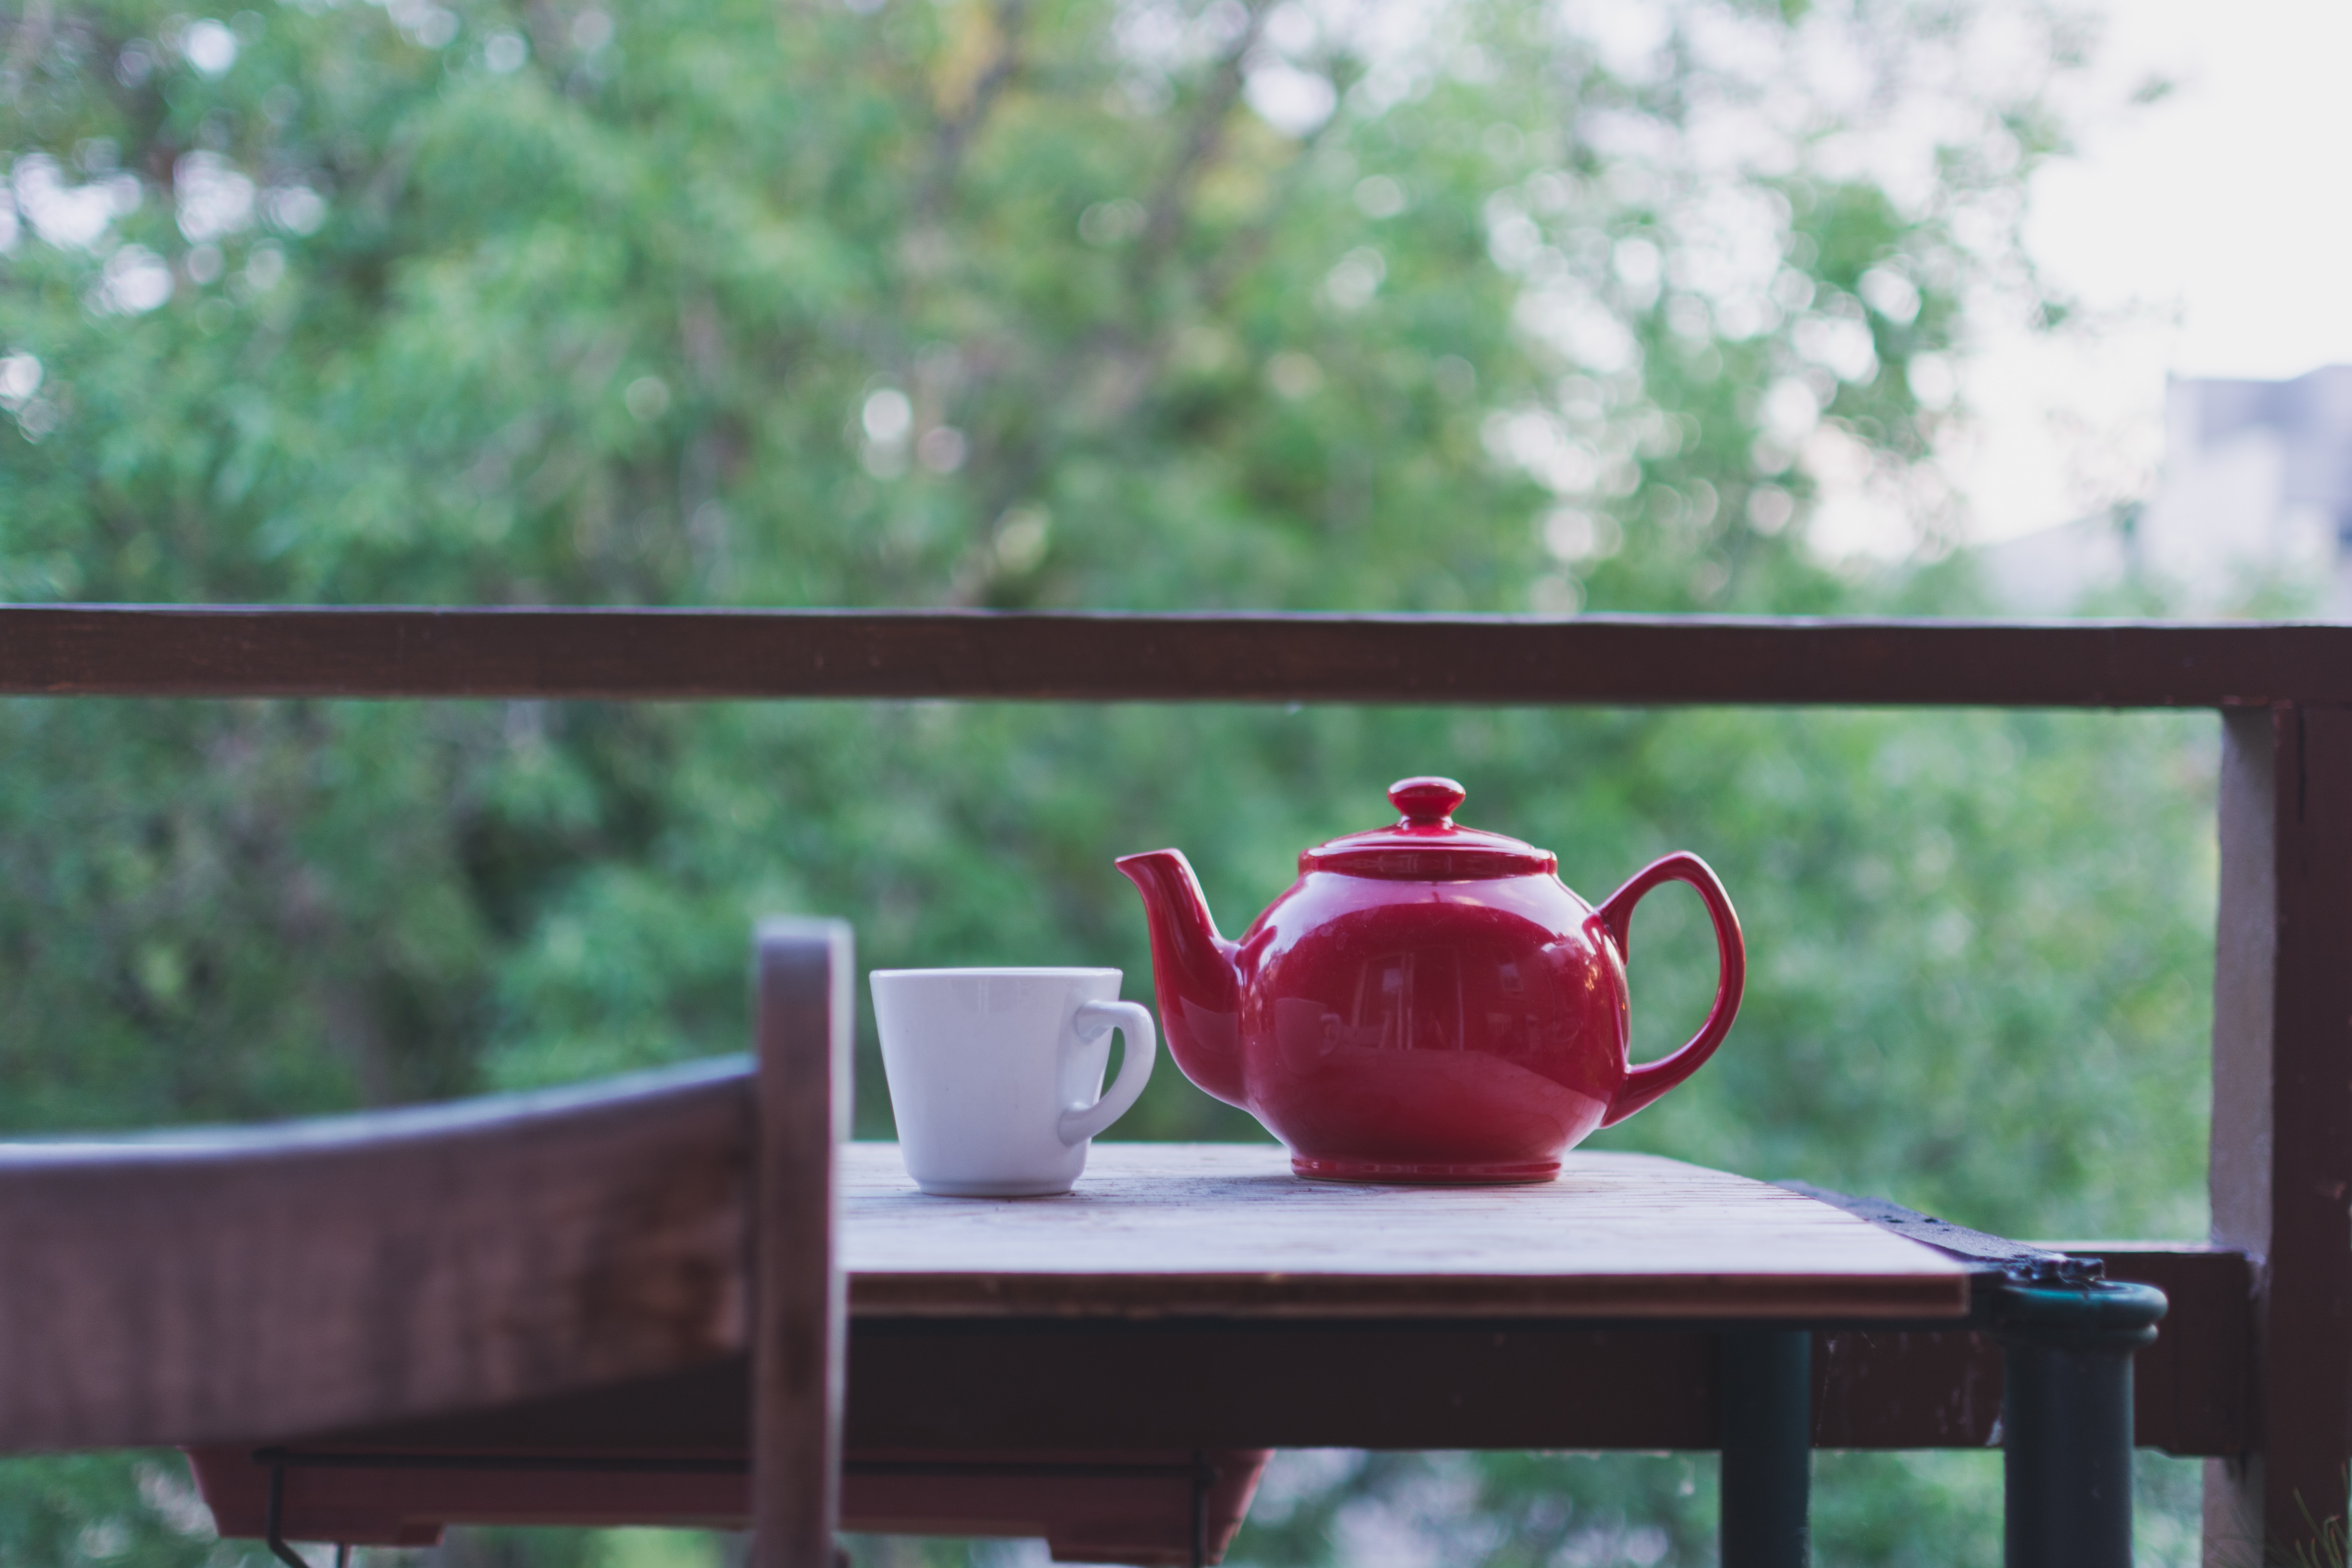 red ceramic teapot near white teacup on brown wooden table during daytime